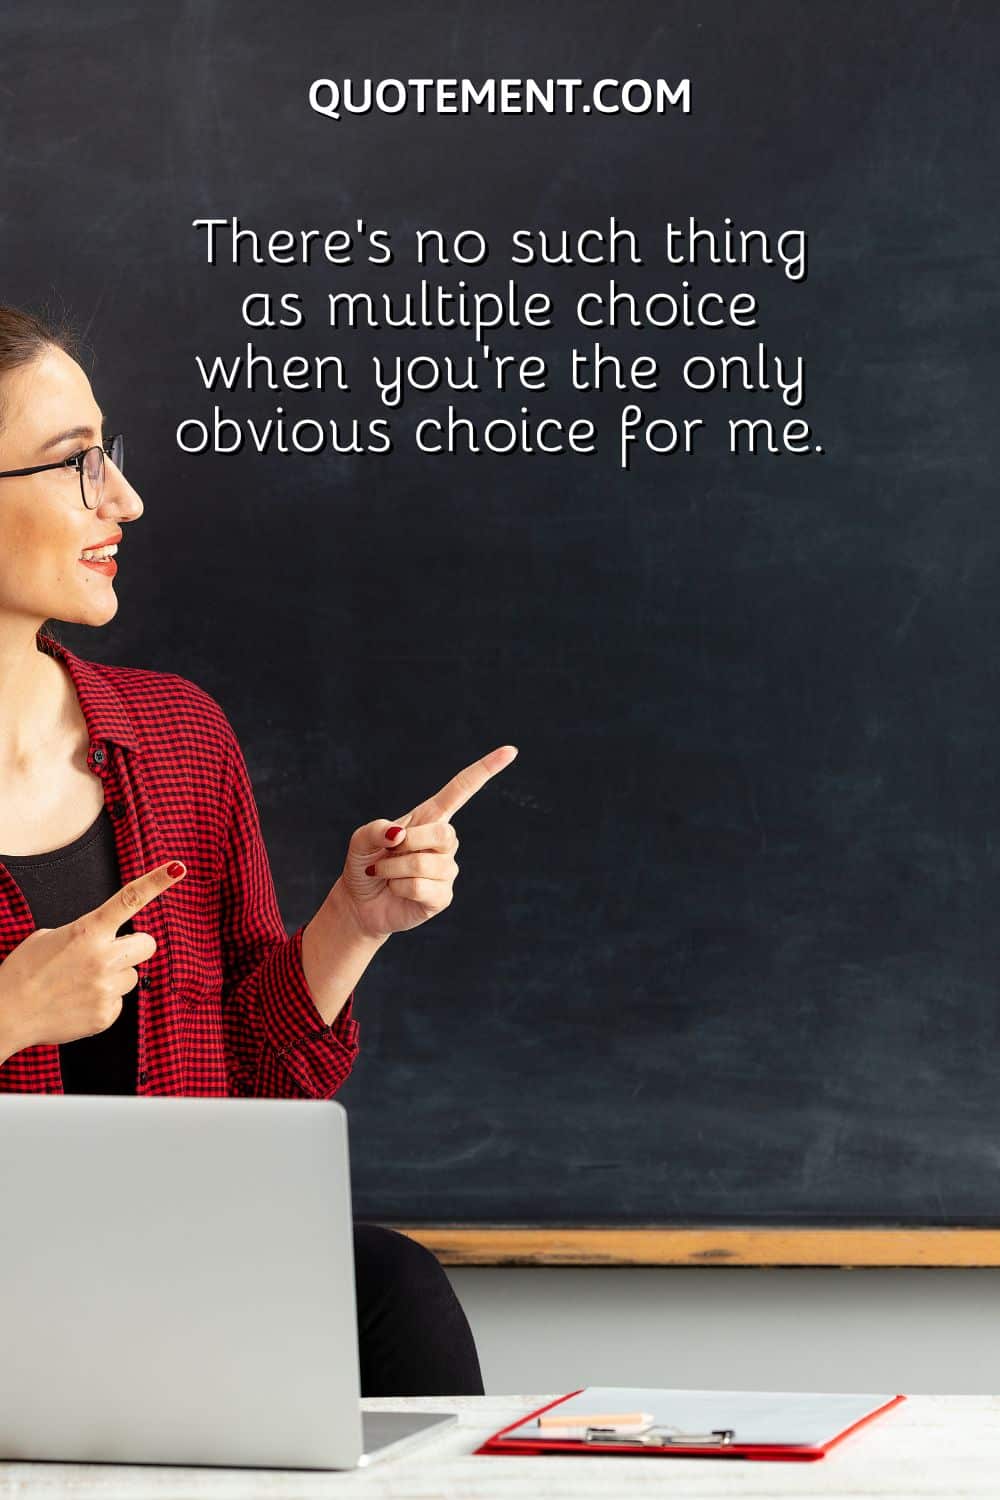 There’s no such thing as multiple choice when you’re the only obvious choice for me